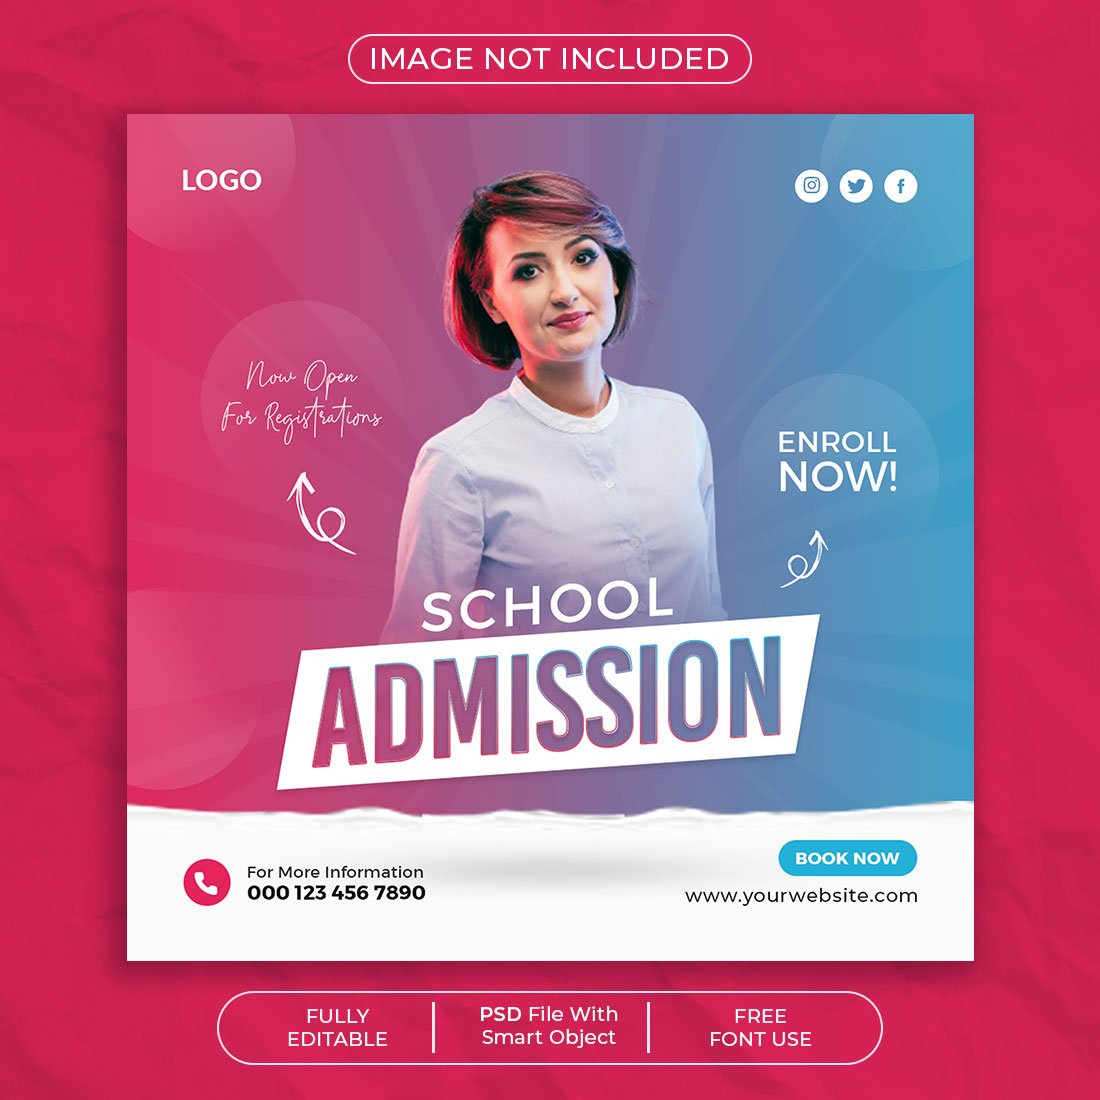 School Education Admission Social Media Post Design Template cover image.